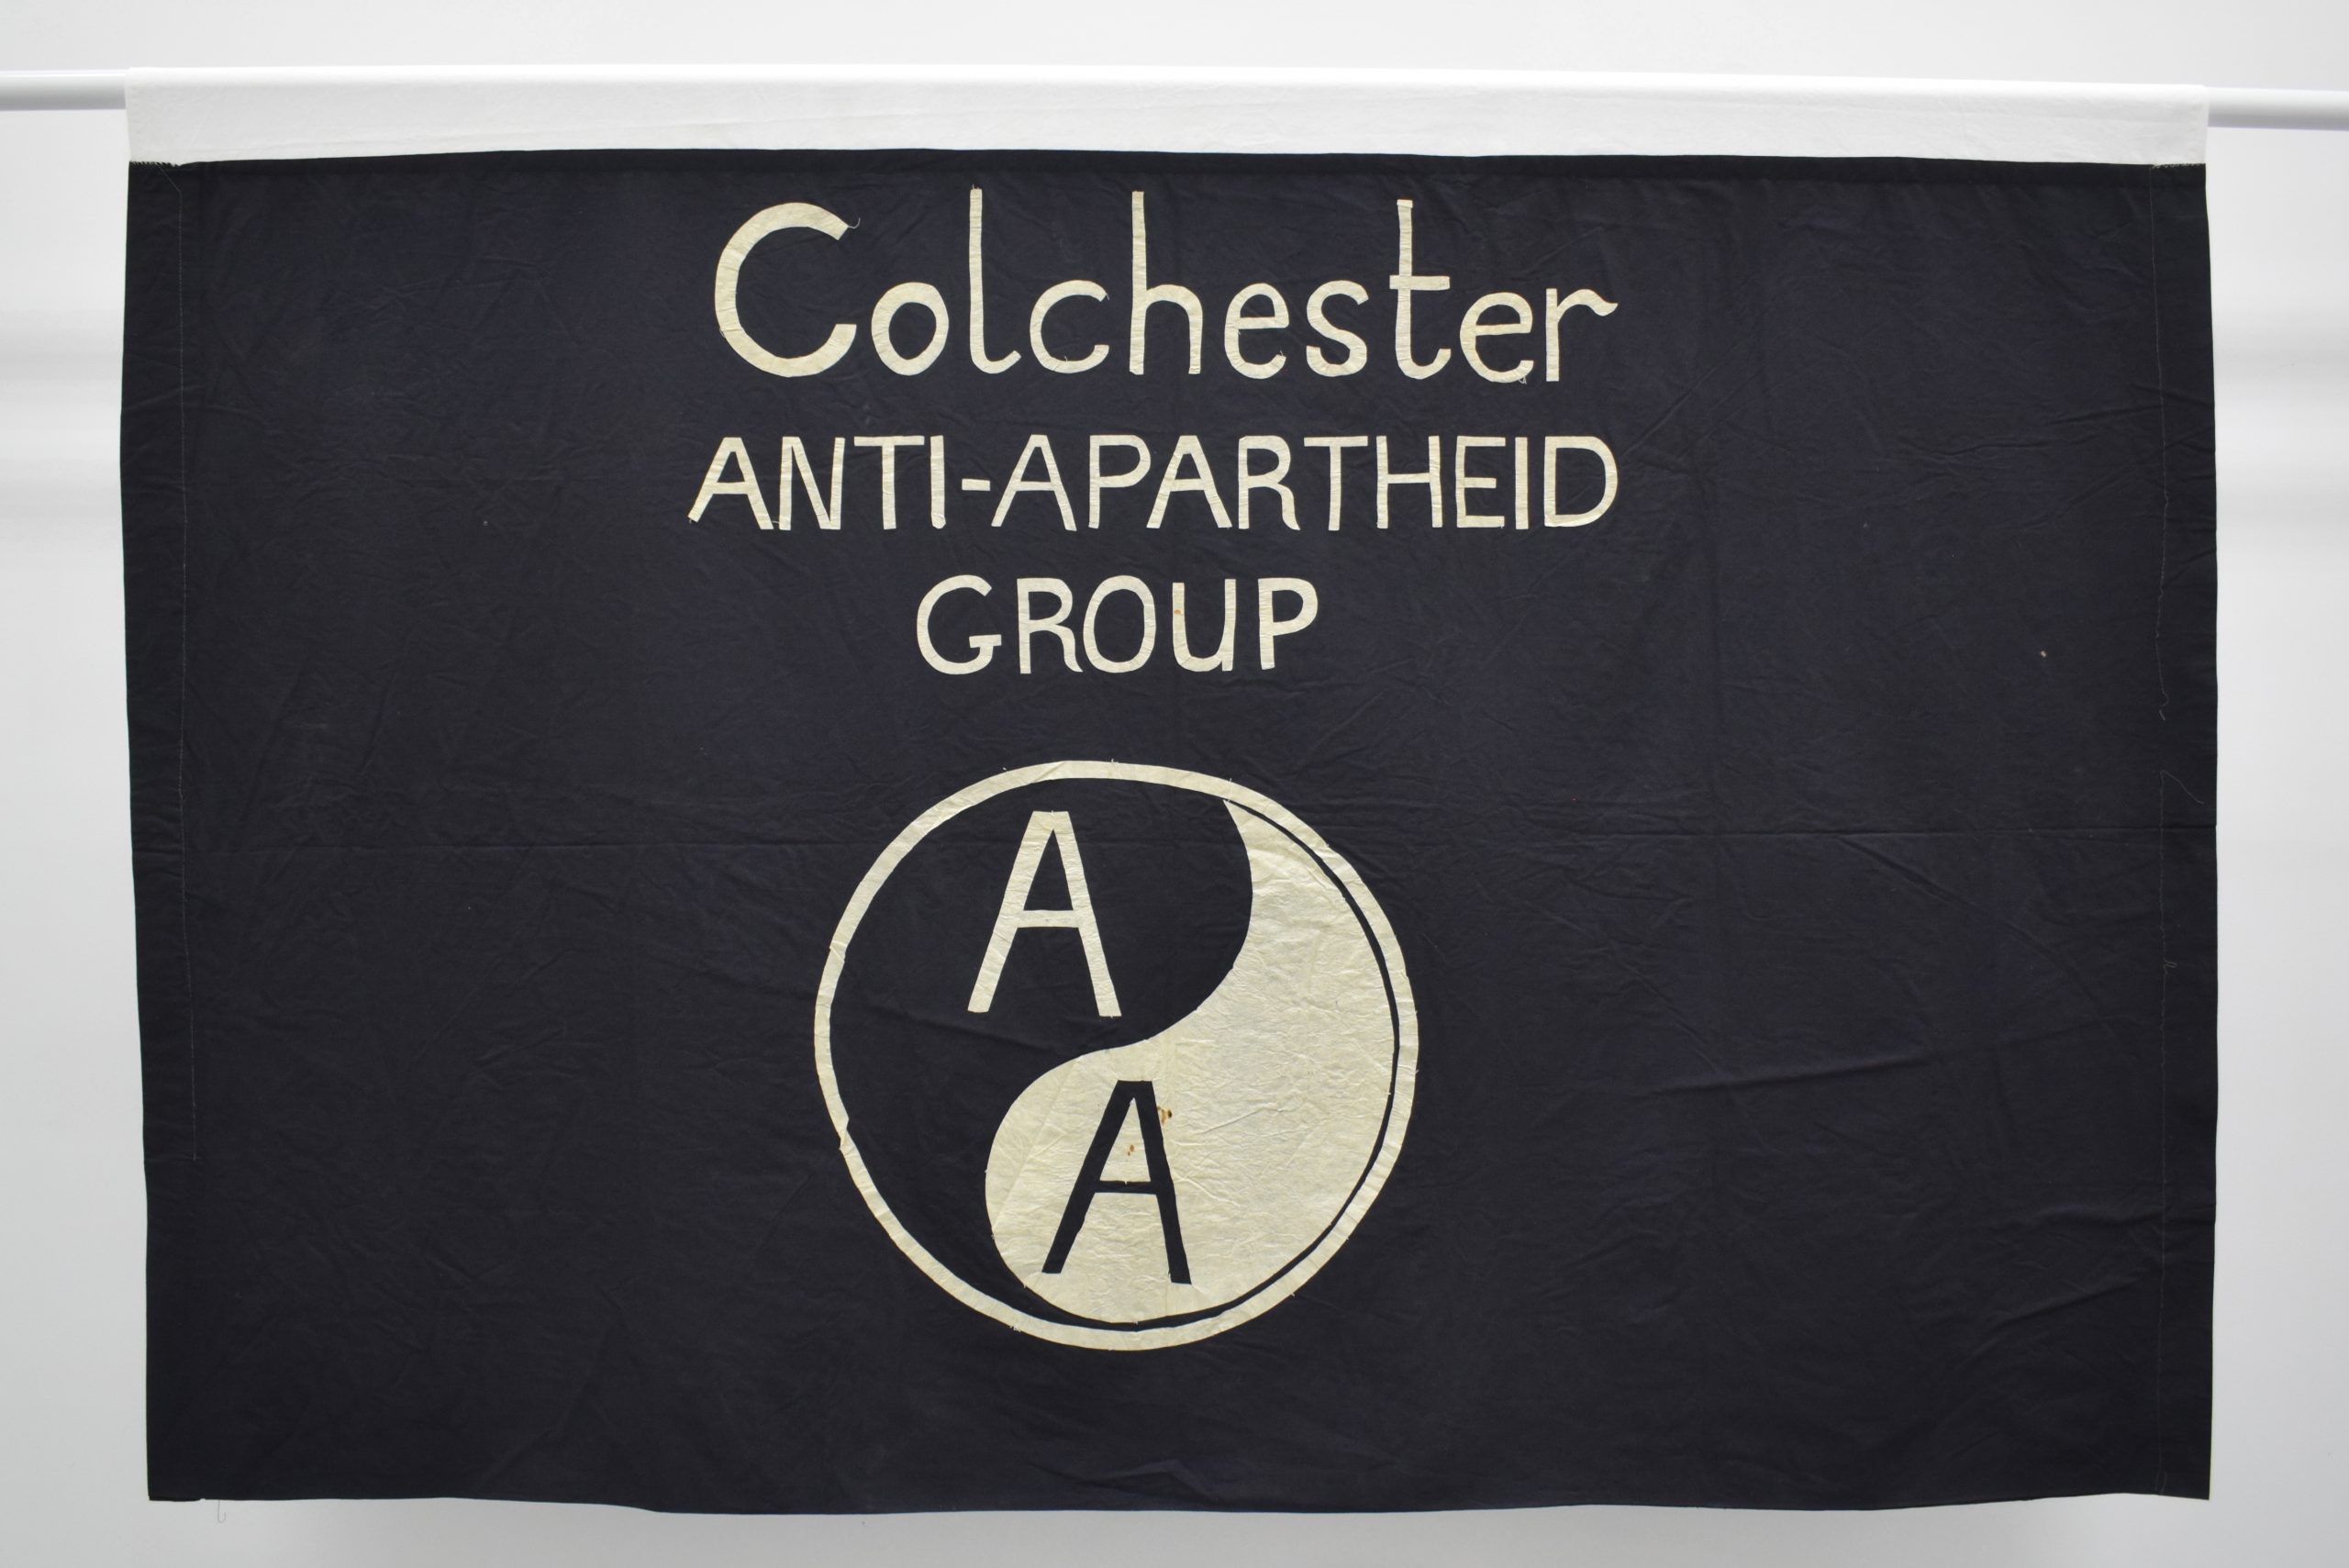 Colchester Anti Apartheid Group banner, around 1980. Image courtesy of People's History Museum